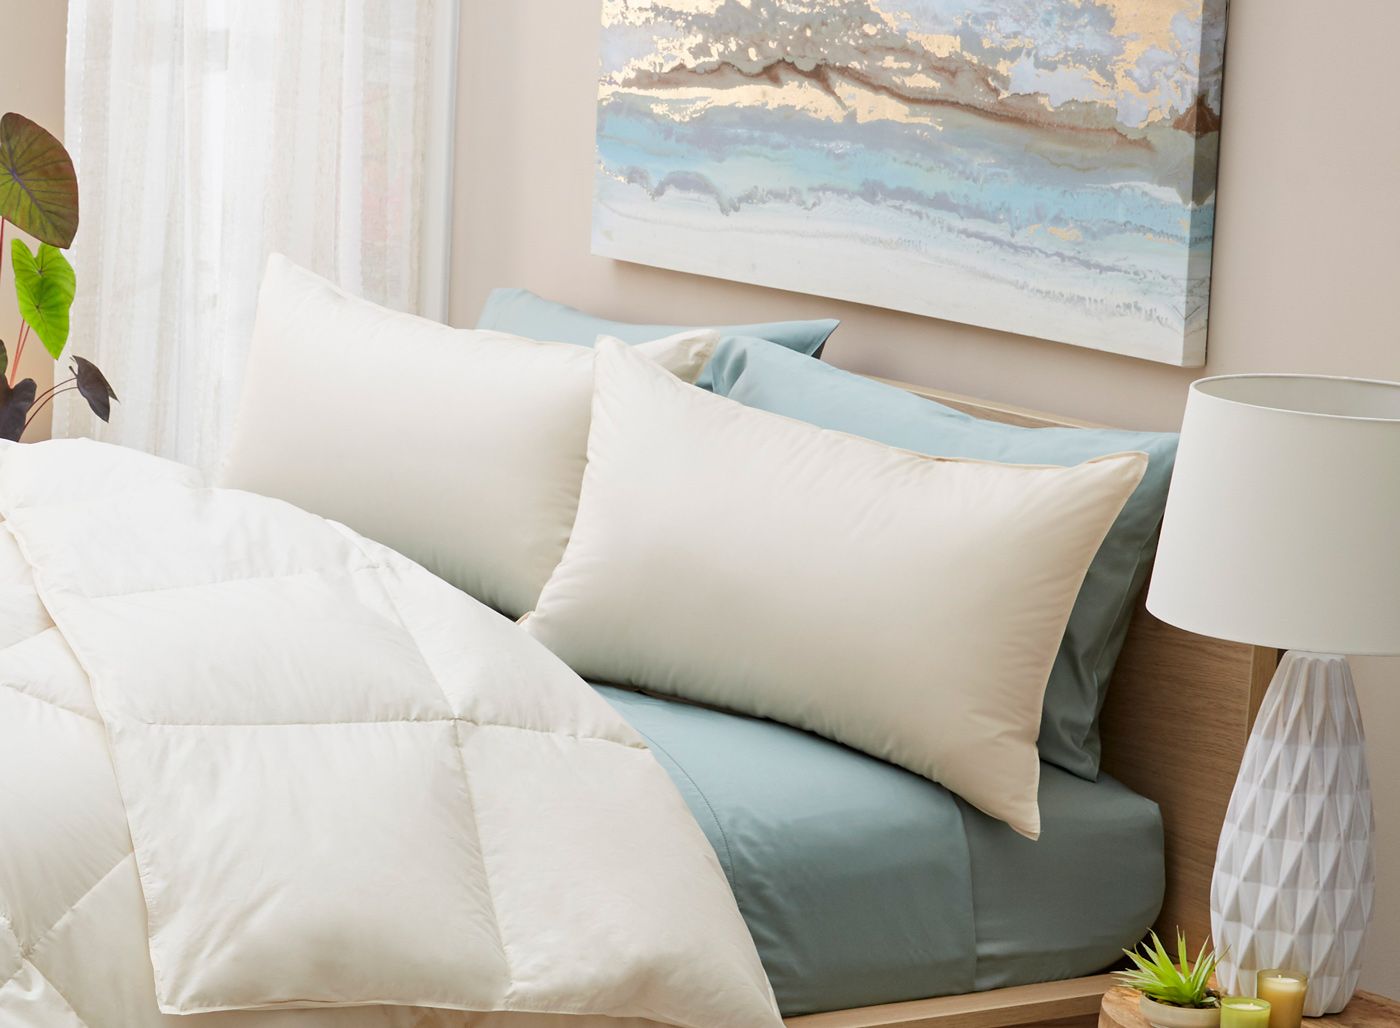 How Often Should You Change Your Bed Pillows?